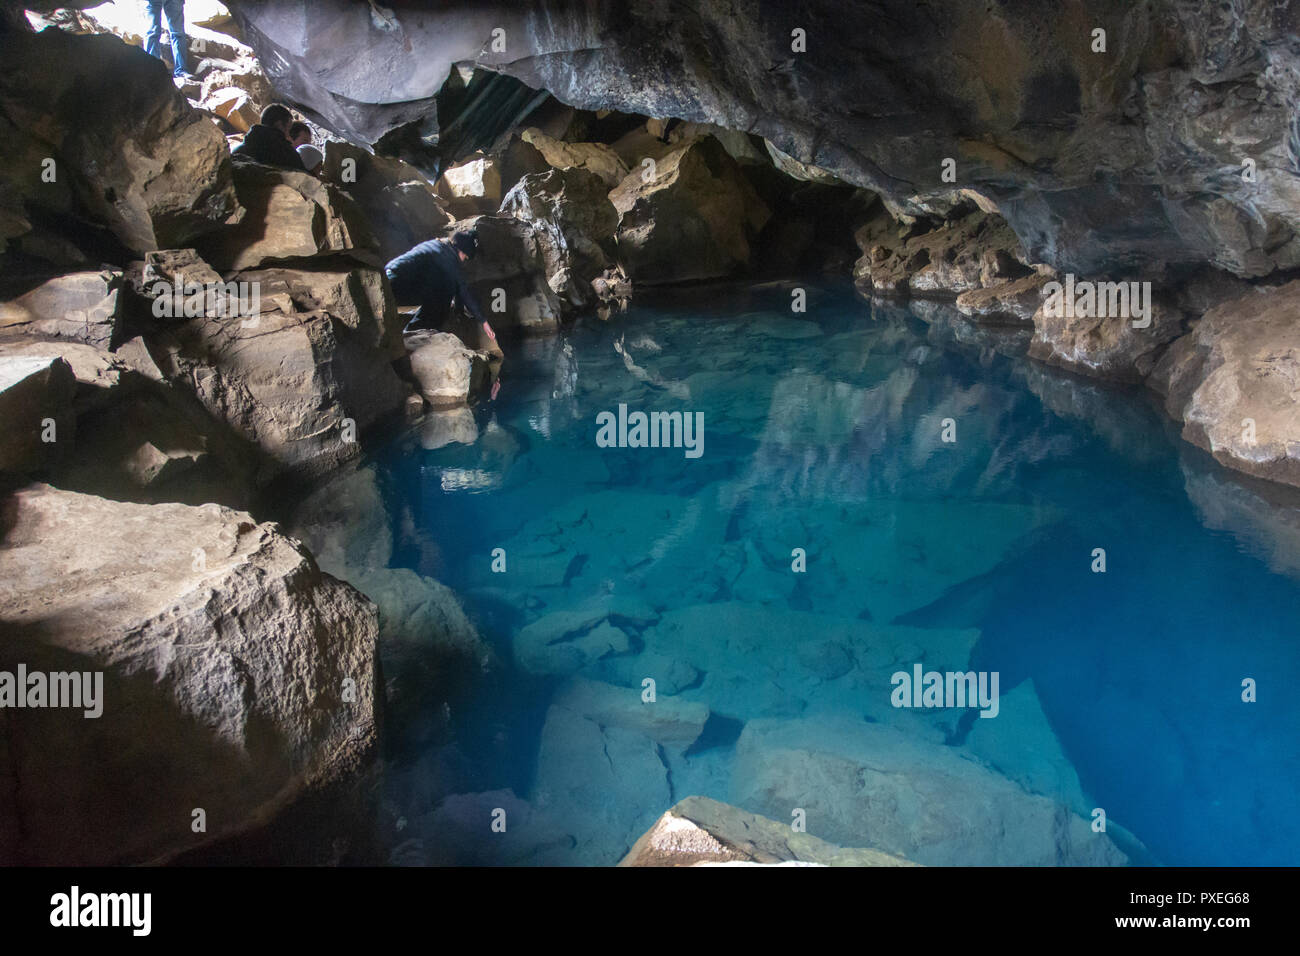 Grjotagja cave in the Kfala area near Lake Myvatn, Iceland.  For years this had been a natural warm water bathing place. Stock Photo